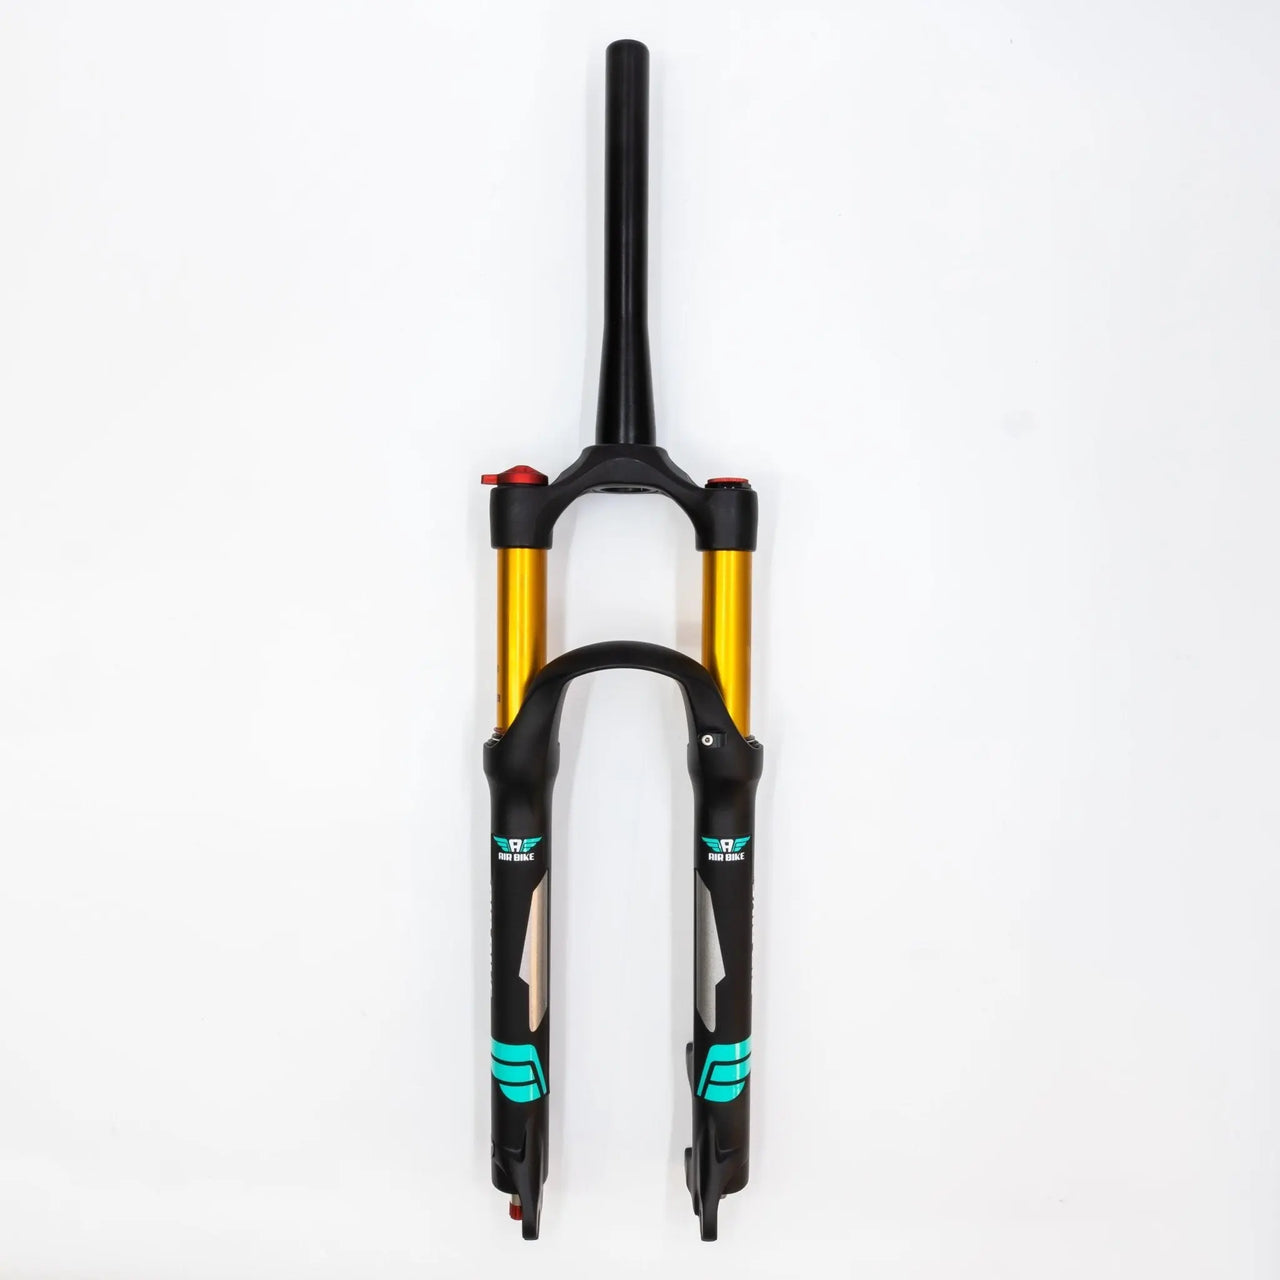 27.5 Inch Air Fork Tapered XC32A Black 140mm Travel & Rebound Suspension Fork Air Bike - Air BikeSuspension Fork